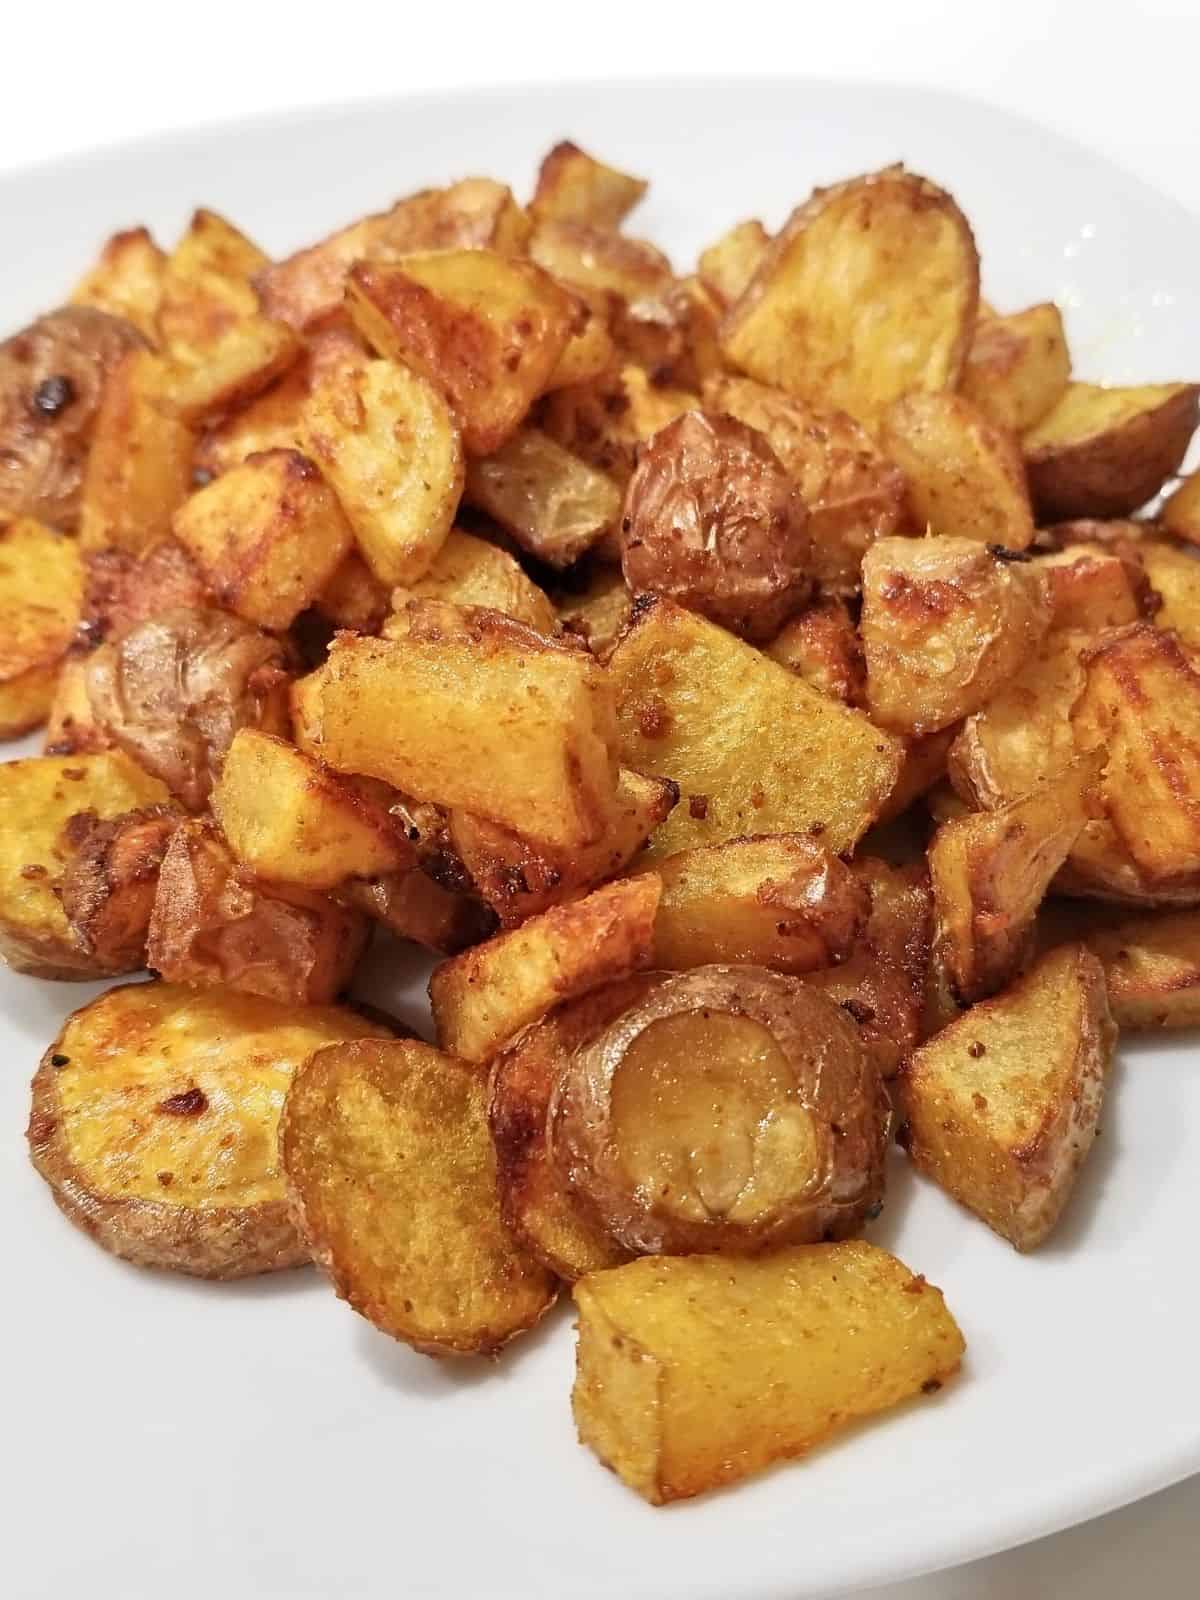 roasted turmeric potatoes in a plate.